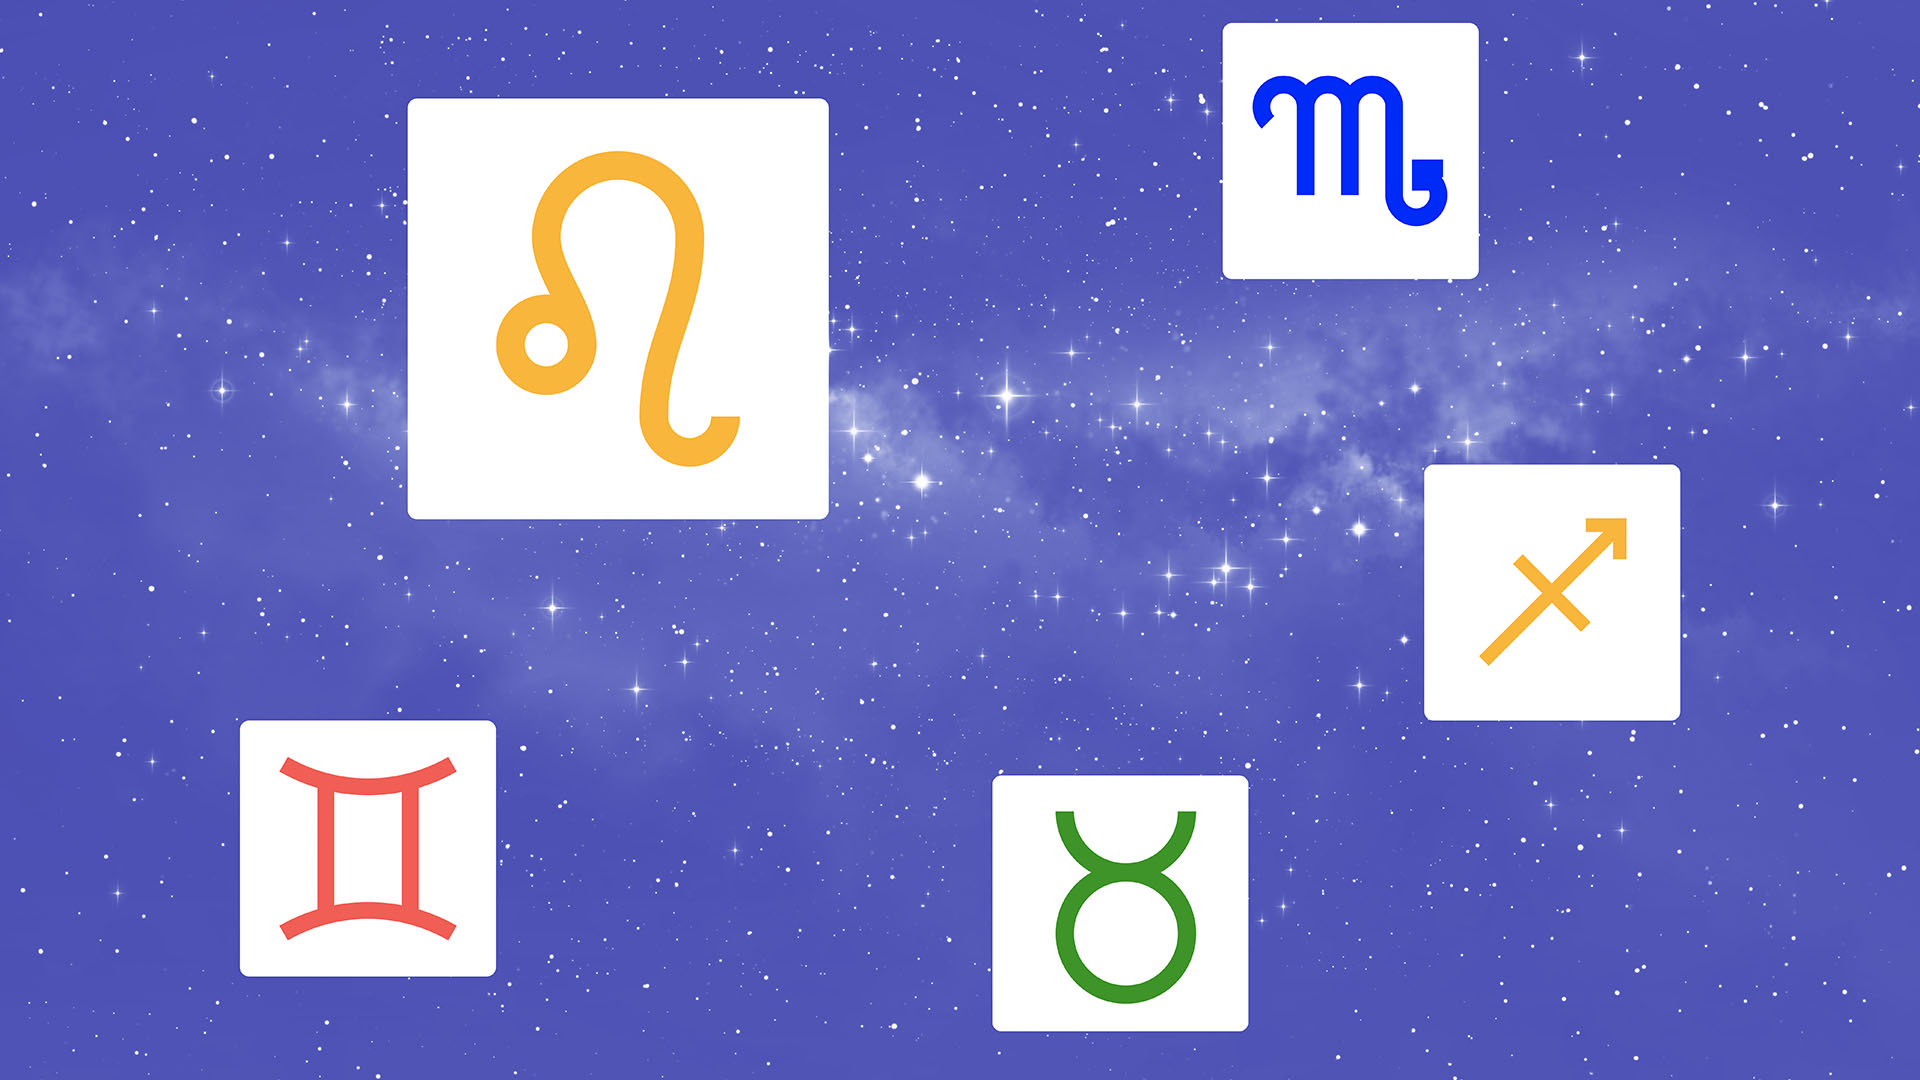 Is Astrology Real? What Science Says About Zodiac Signs & Horoscope